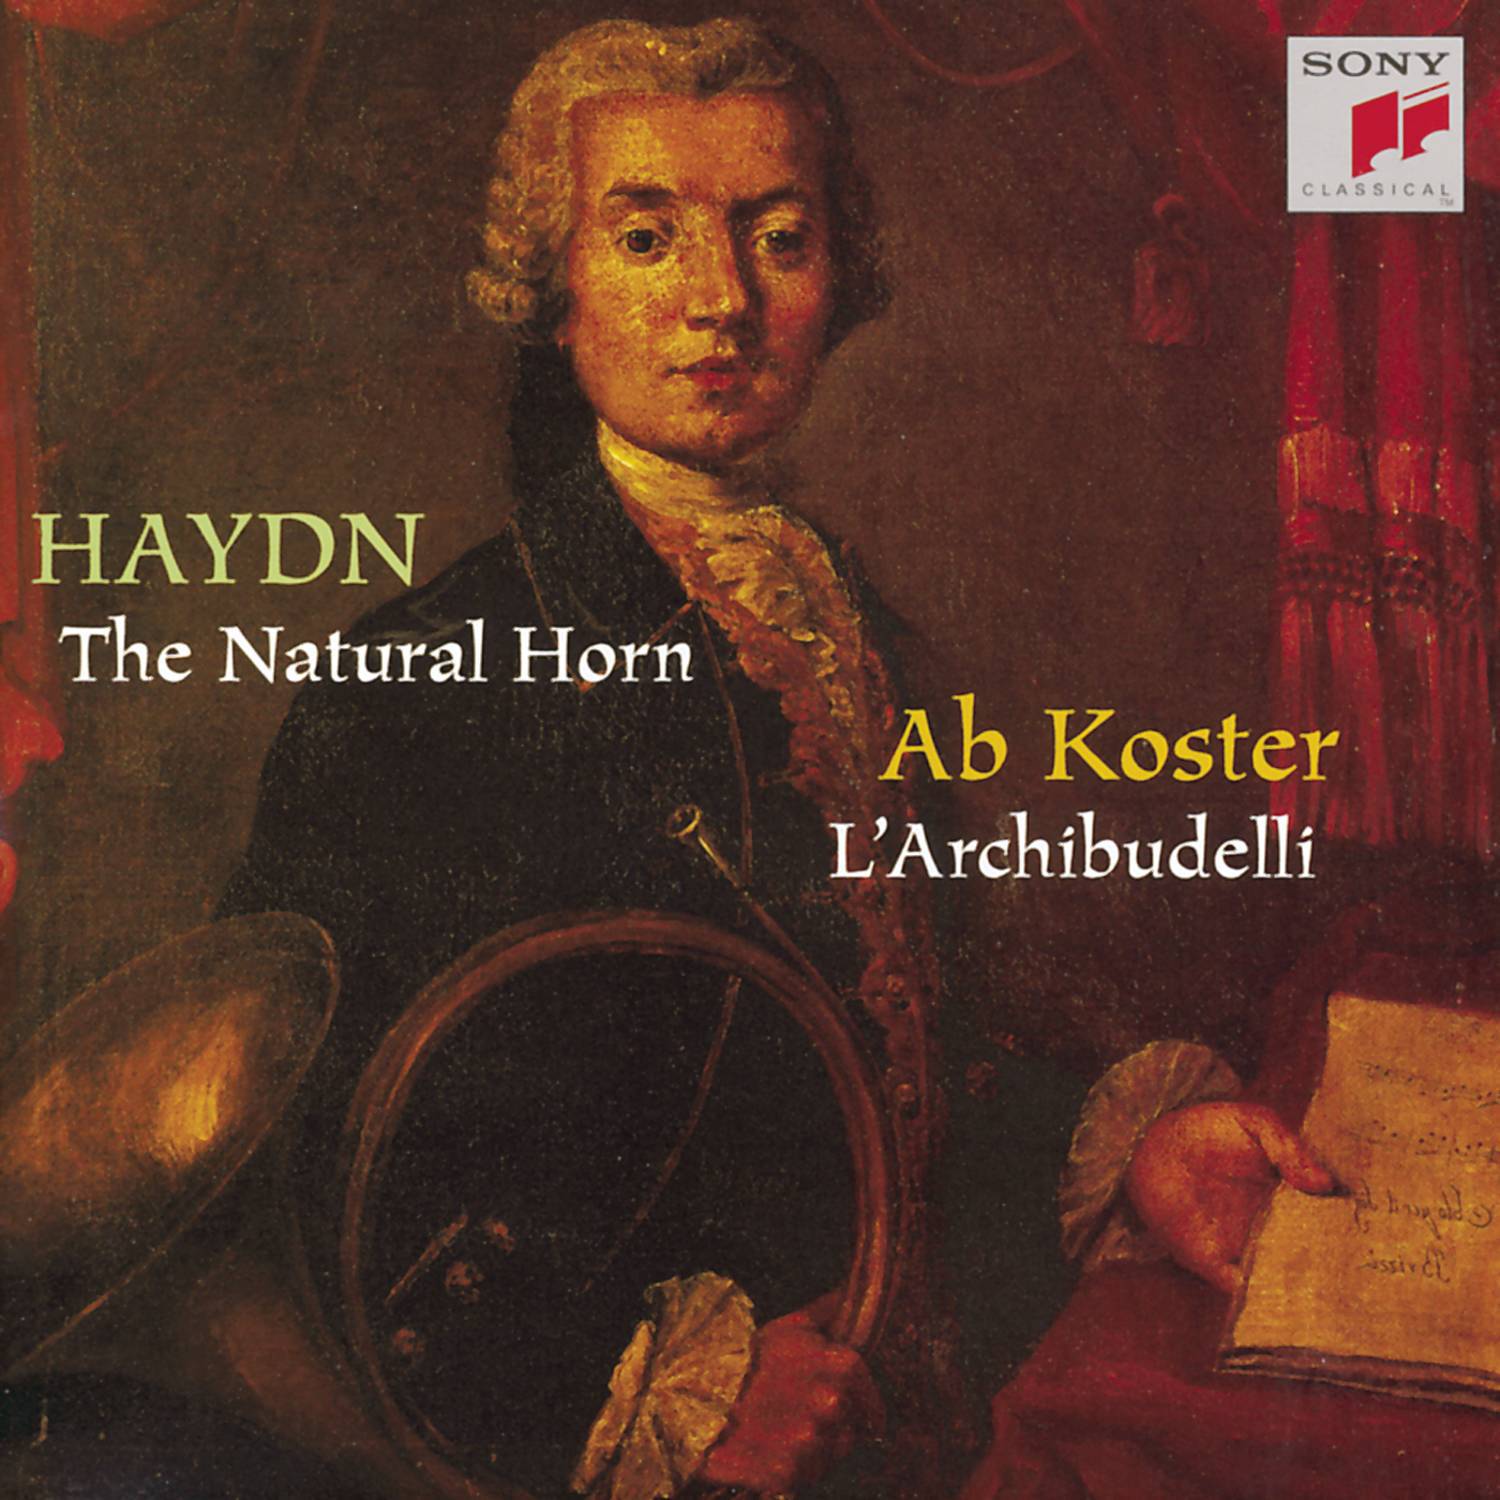 Concerto in D Major for Horn, 2 Oboes and Strings, Hob. VII d:3: III. Allegro